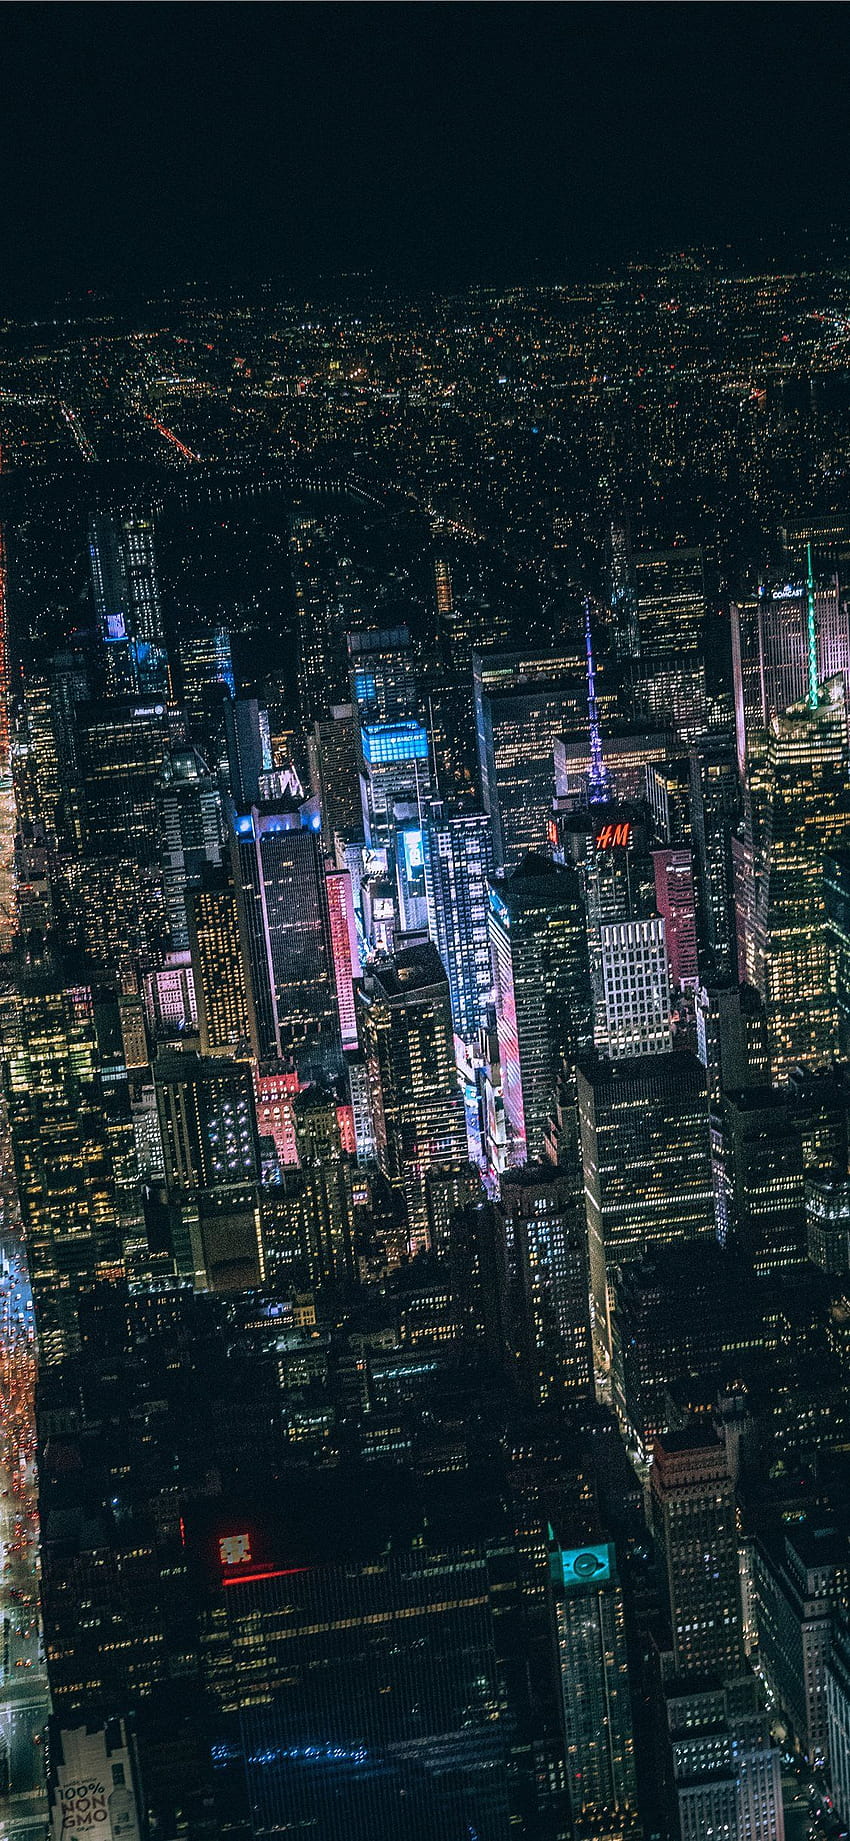 aerial view of city buildings during night time iPhone X, city aesthetic at night HD phone wallpaper